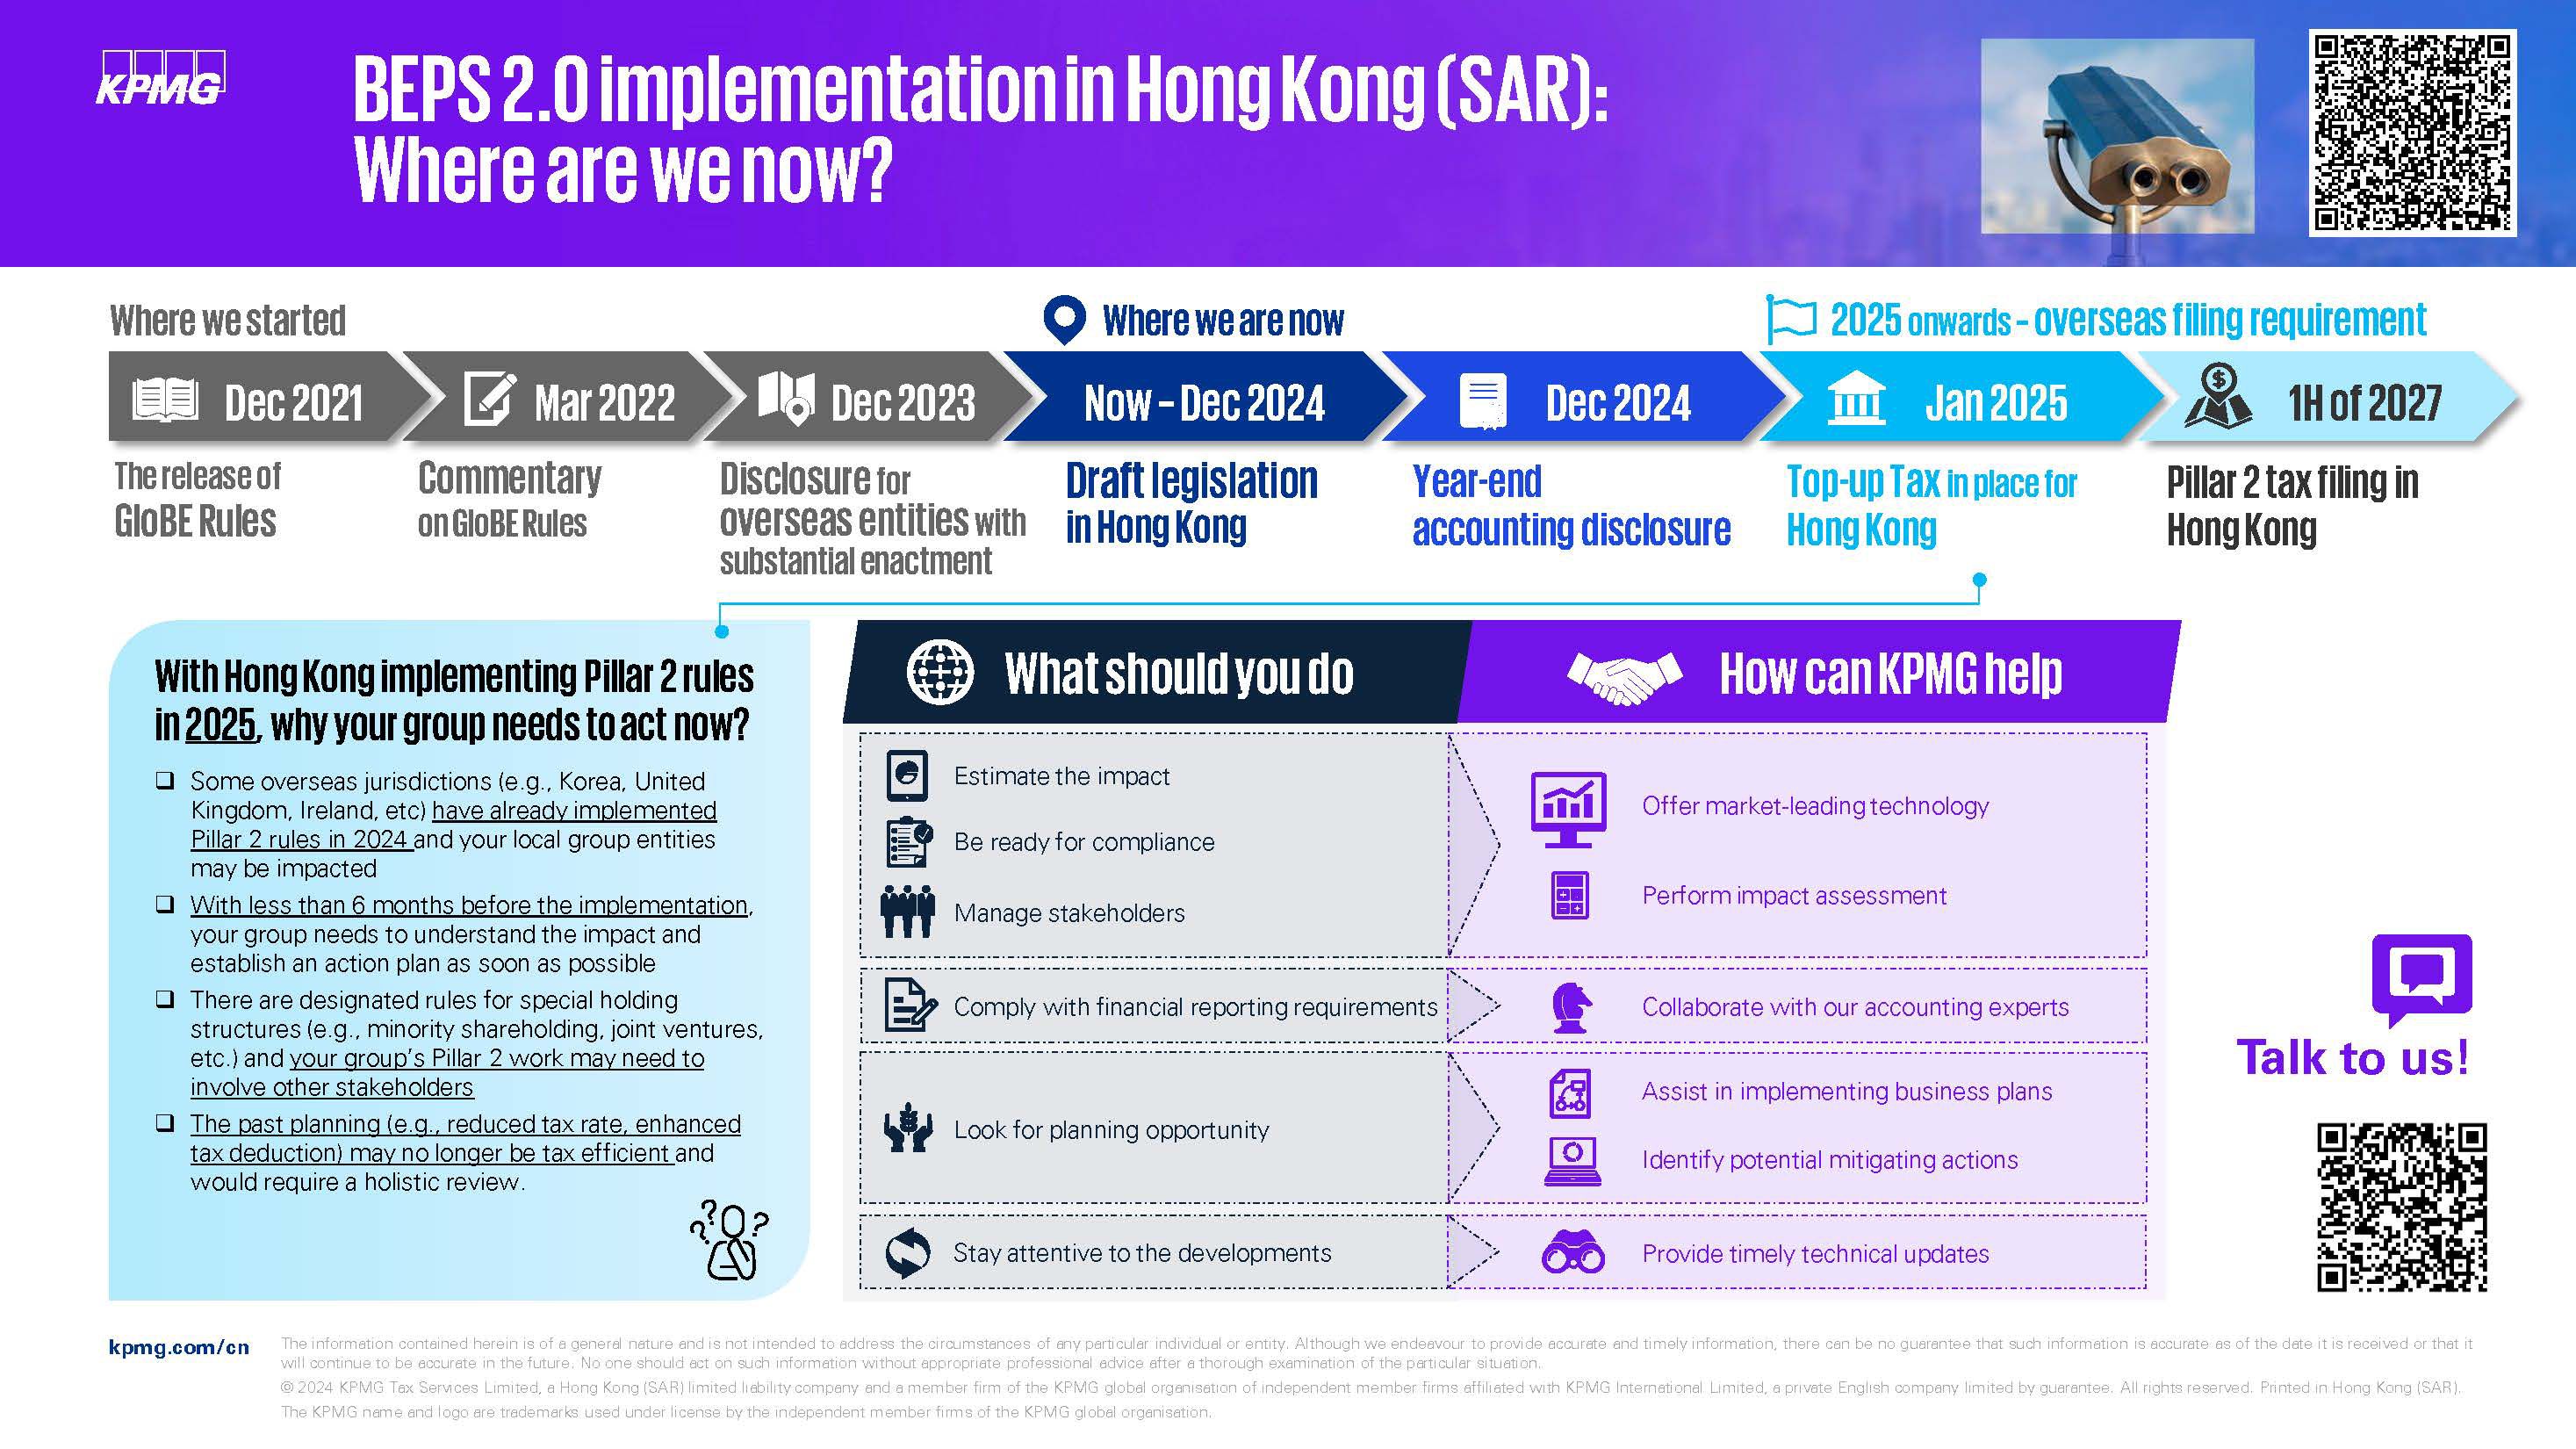 BEPS 2.0 implementation in Hong Kong (SAR): Where are we now?